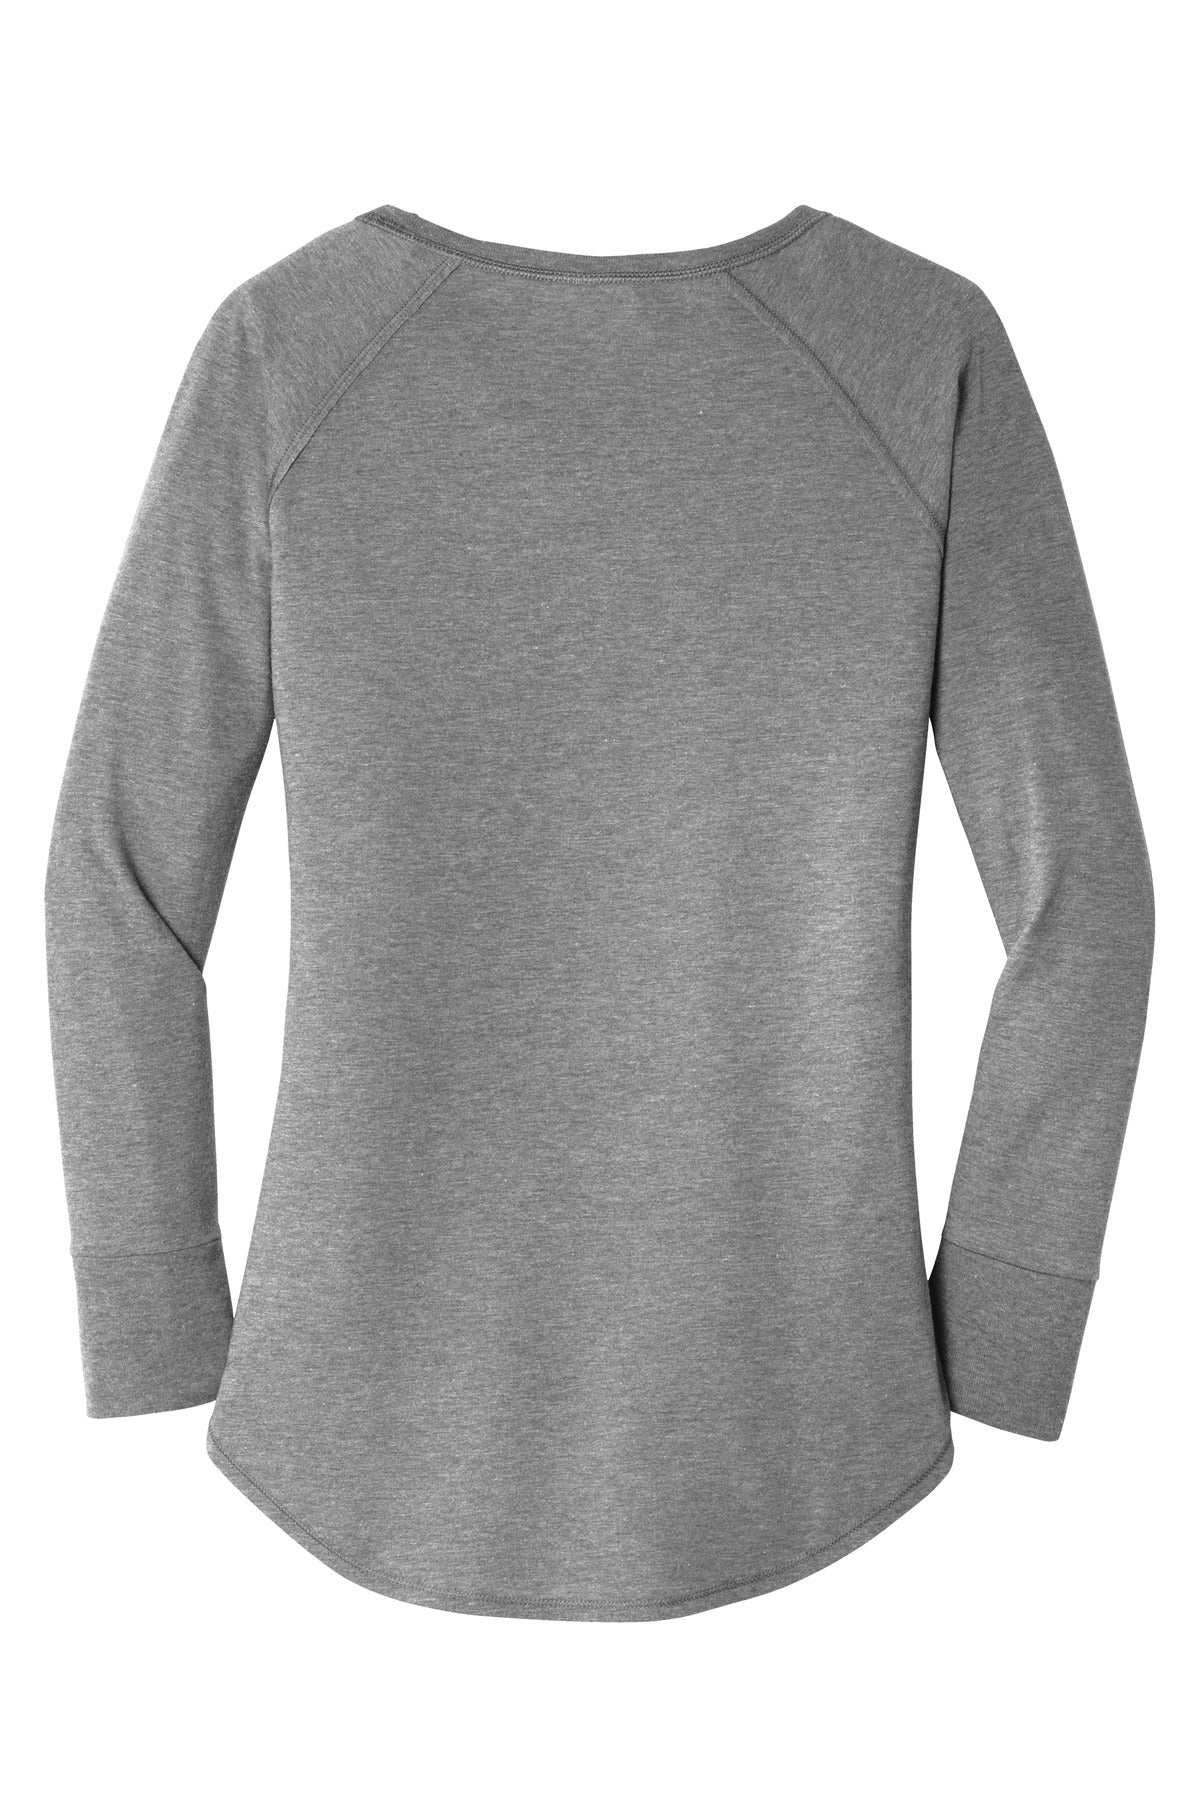 District Women's Perfect Tri Long Sleeve Tunic Tee. DT132L